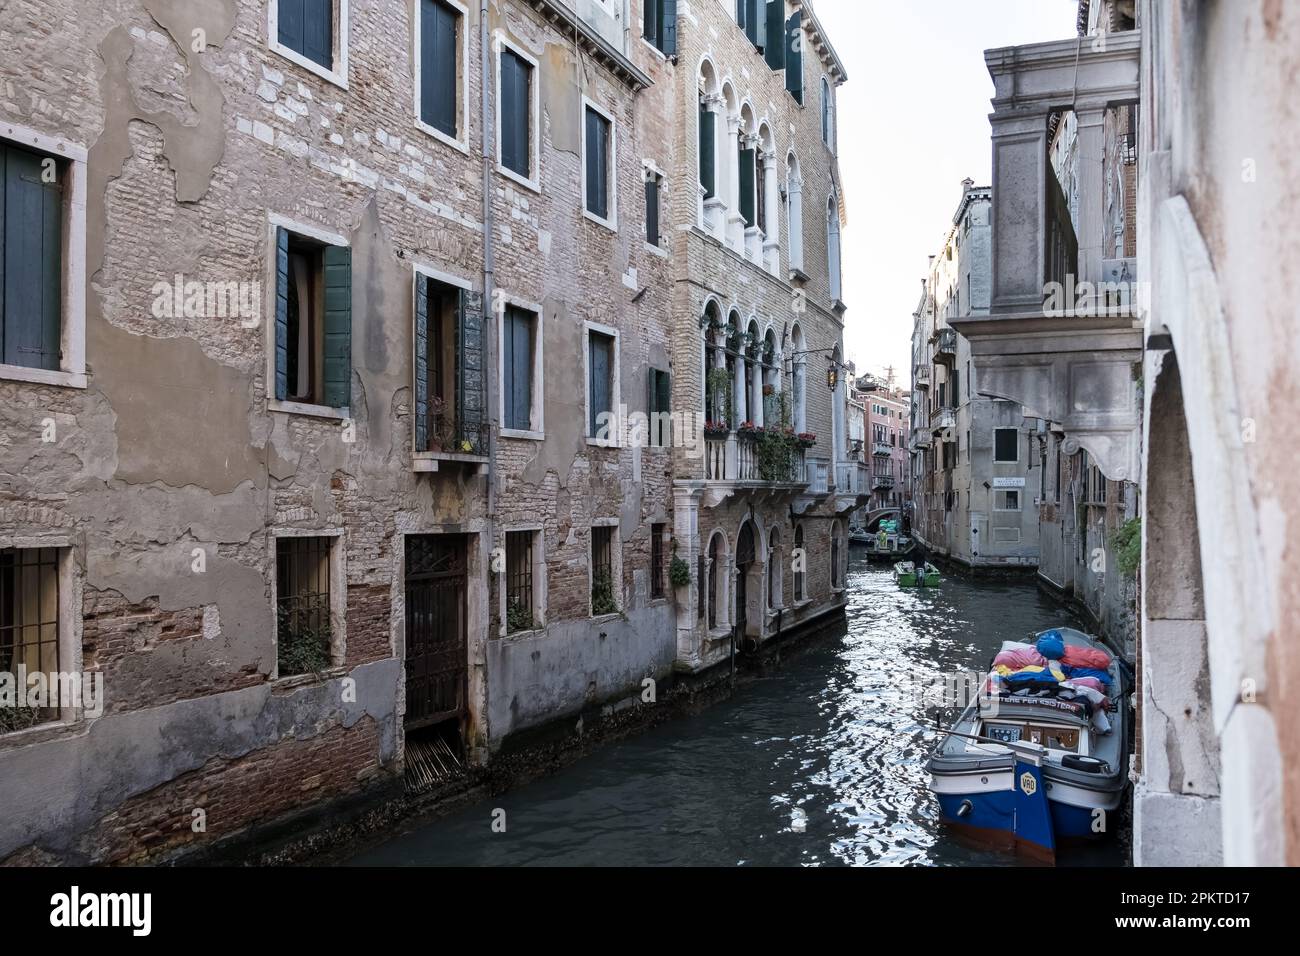 View of the Rio di San Luca (Canal of Saint Luke), a canal of Venice in the sestiere of San Marco from the Ponte de la Cortesia Stock Photo